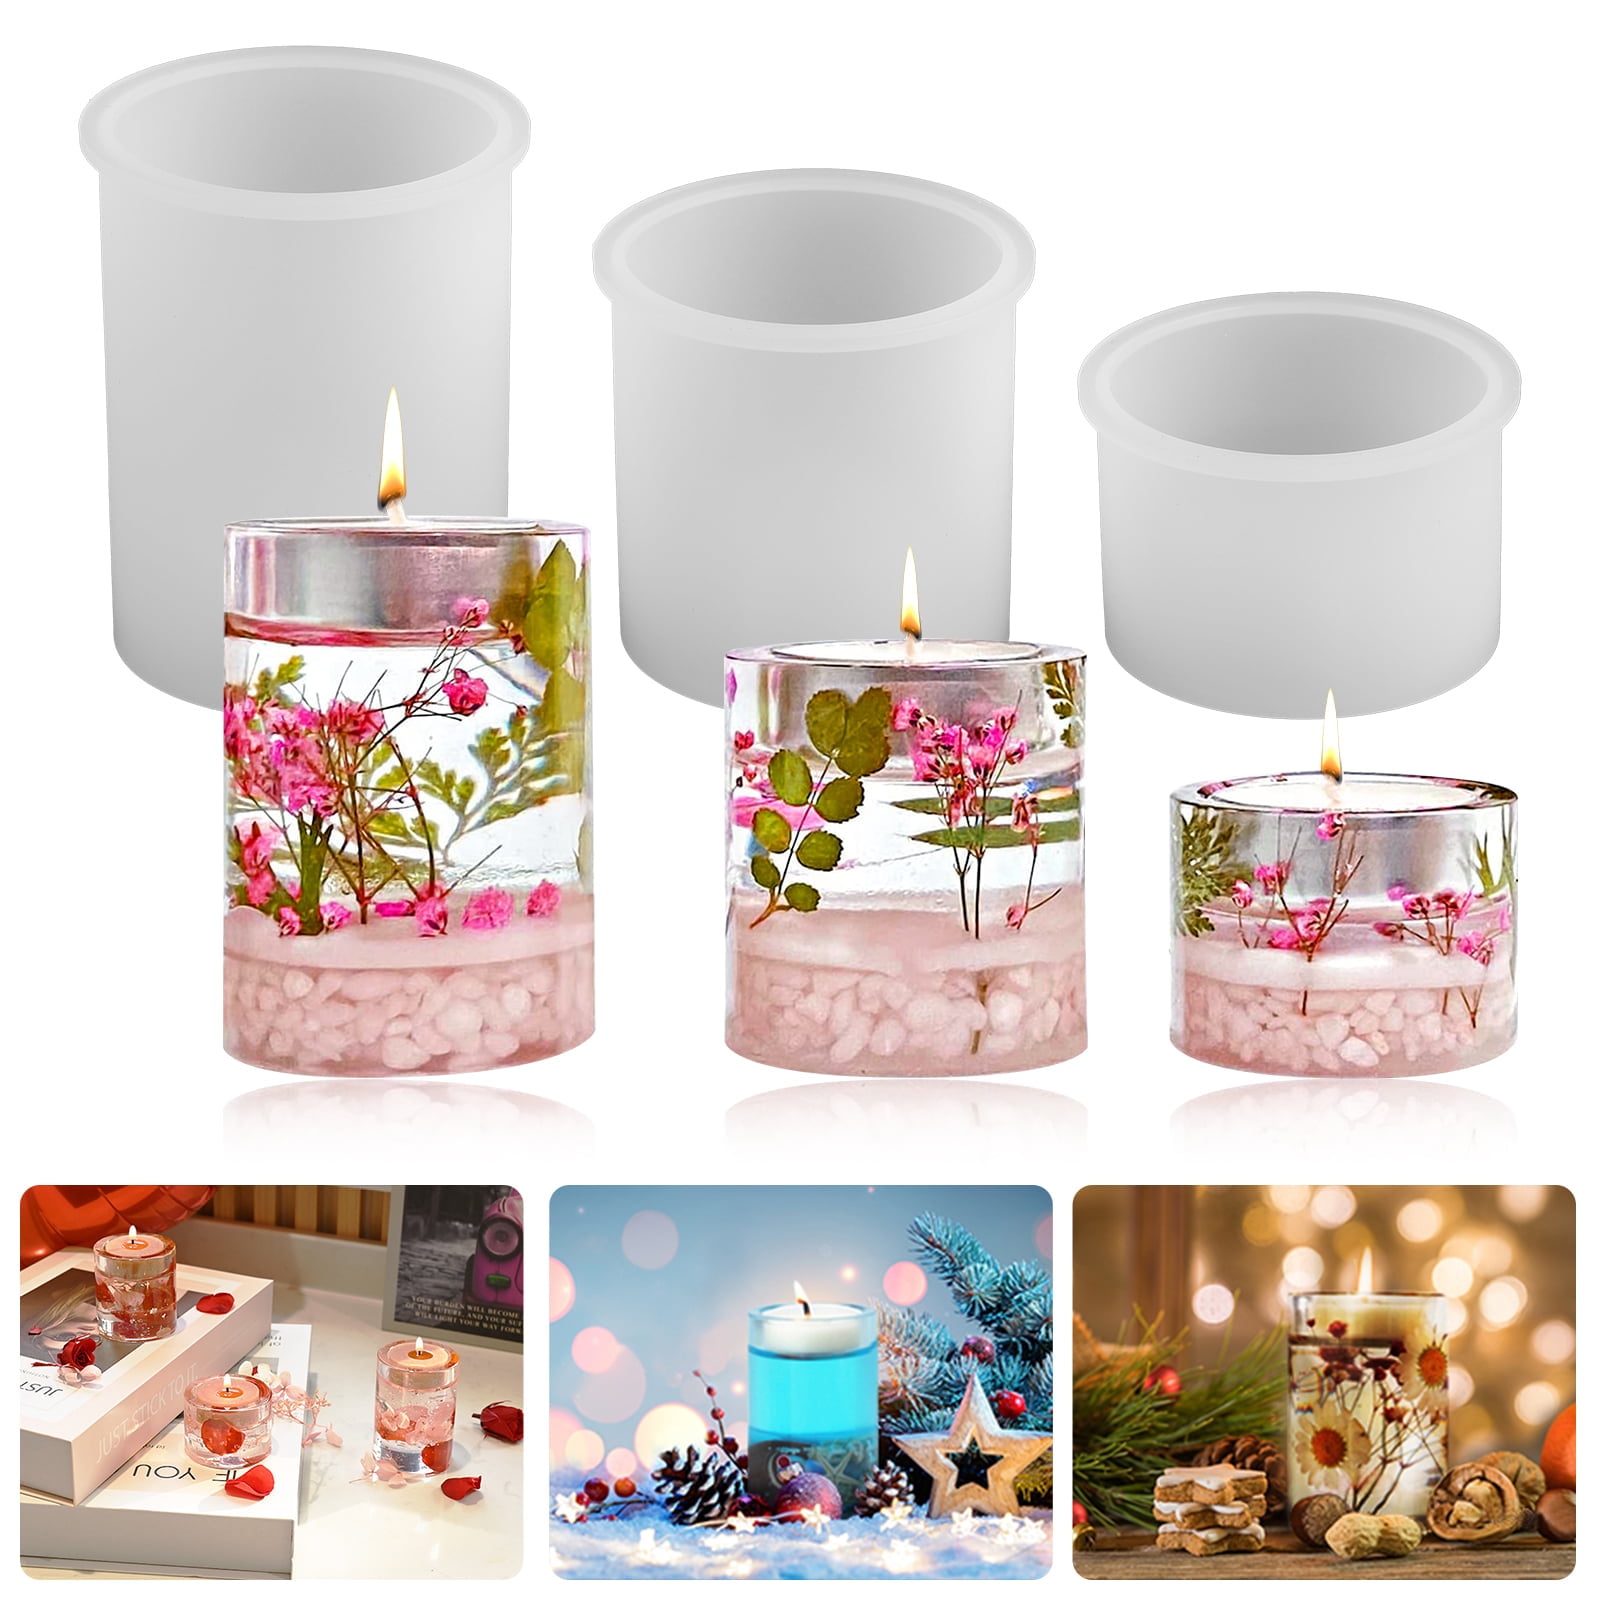 Cylindrical rose candle mold - Graffiti Resin Shop for Resin and